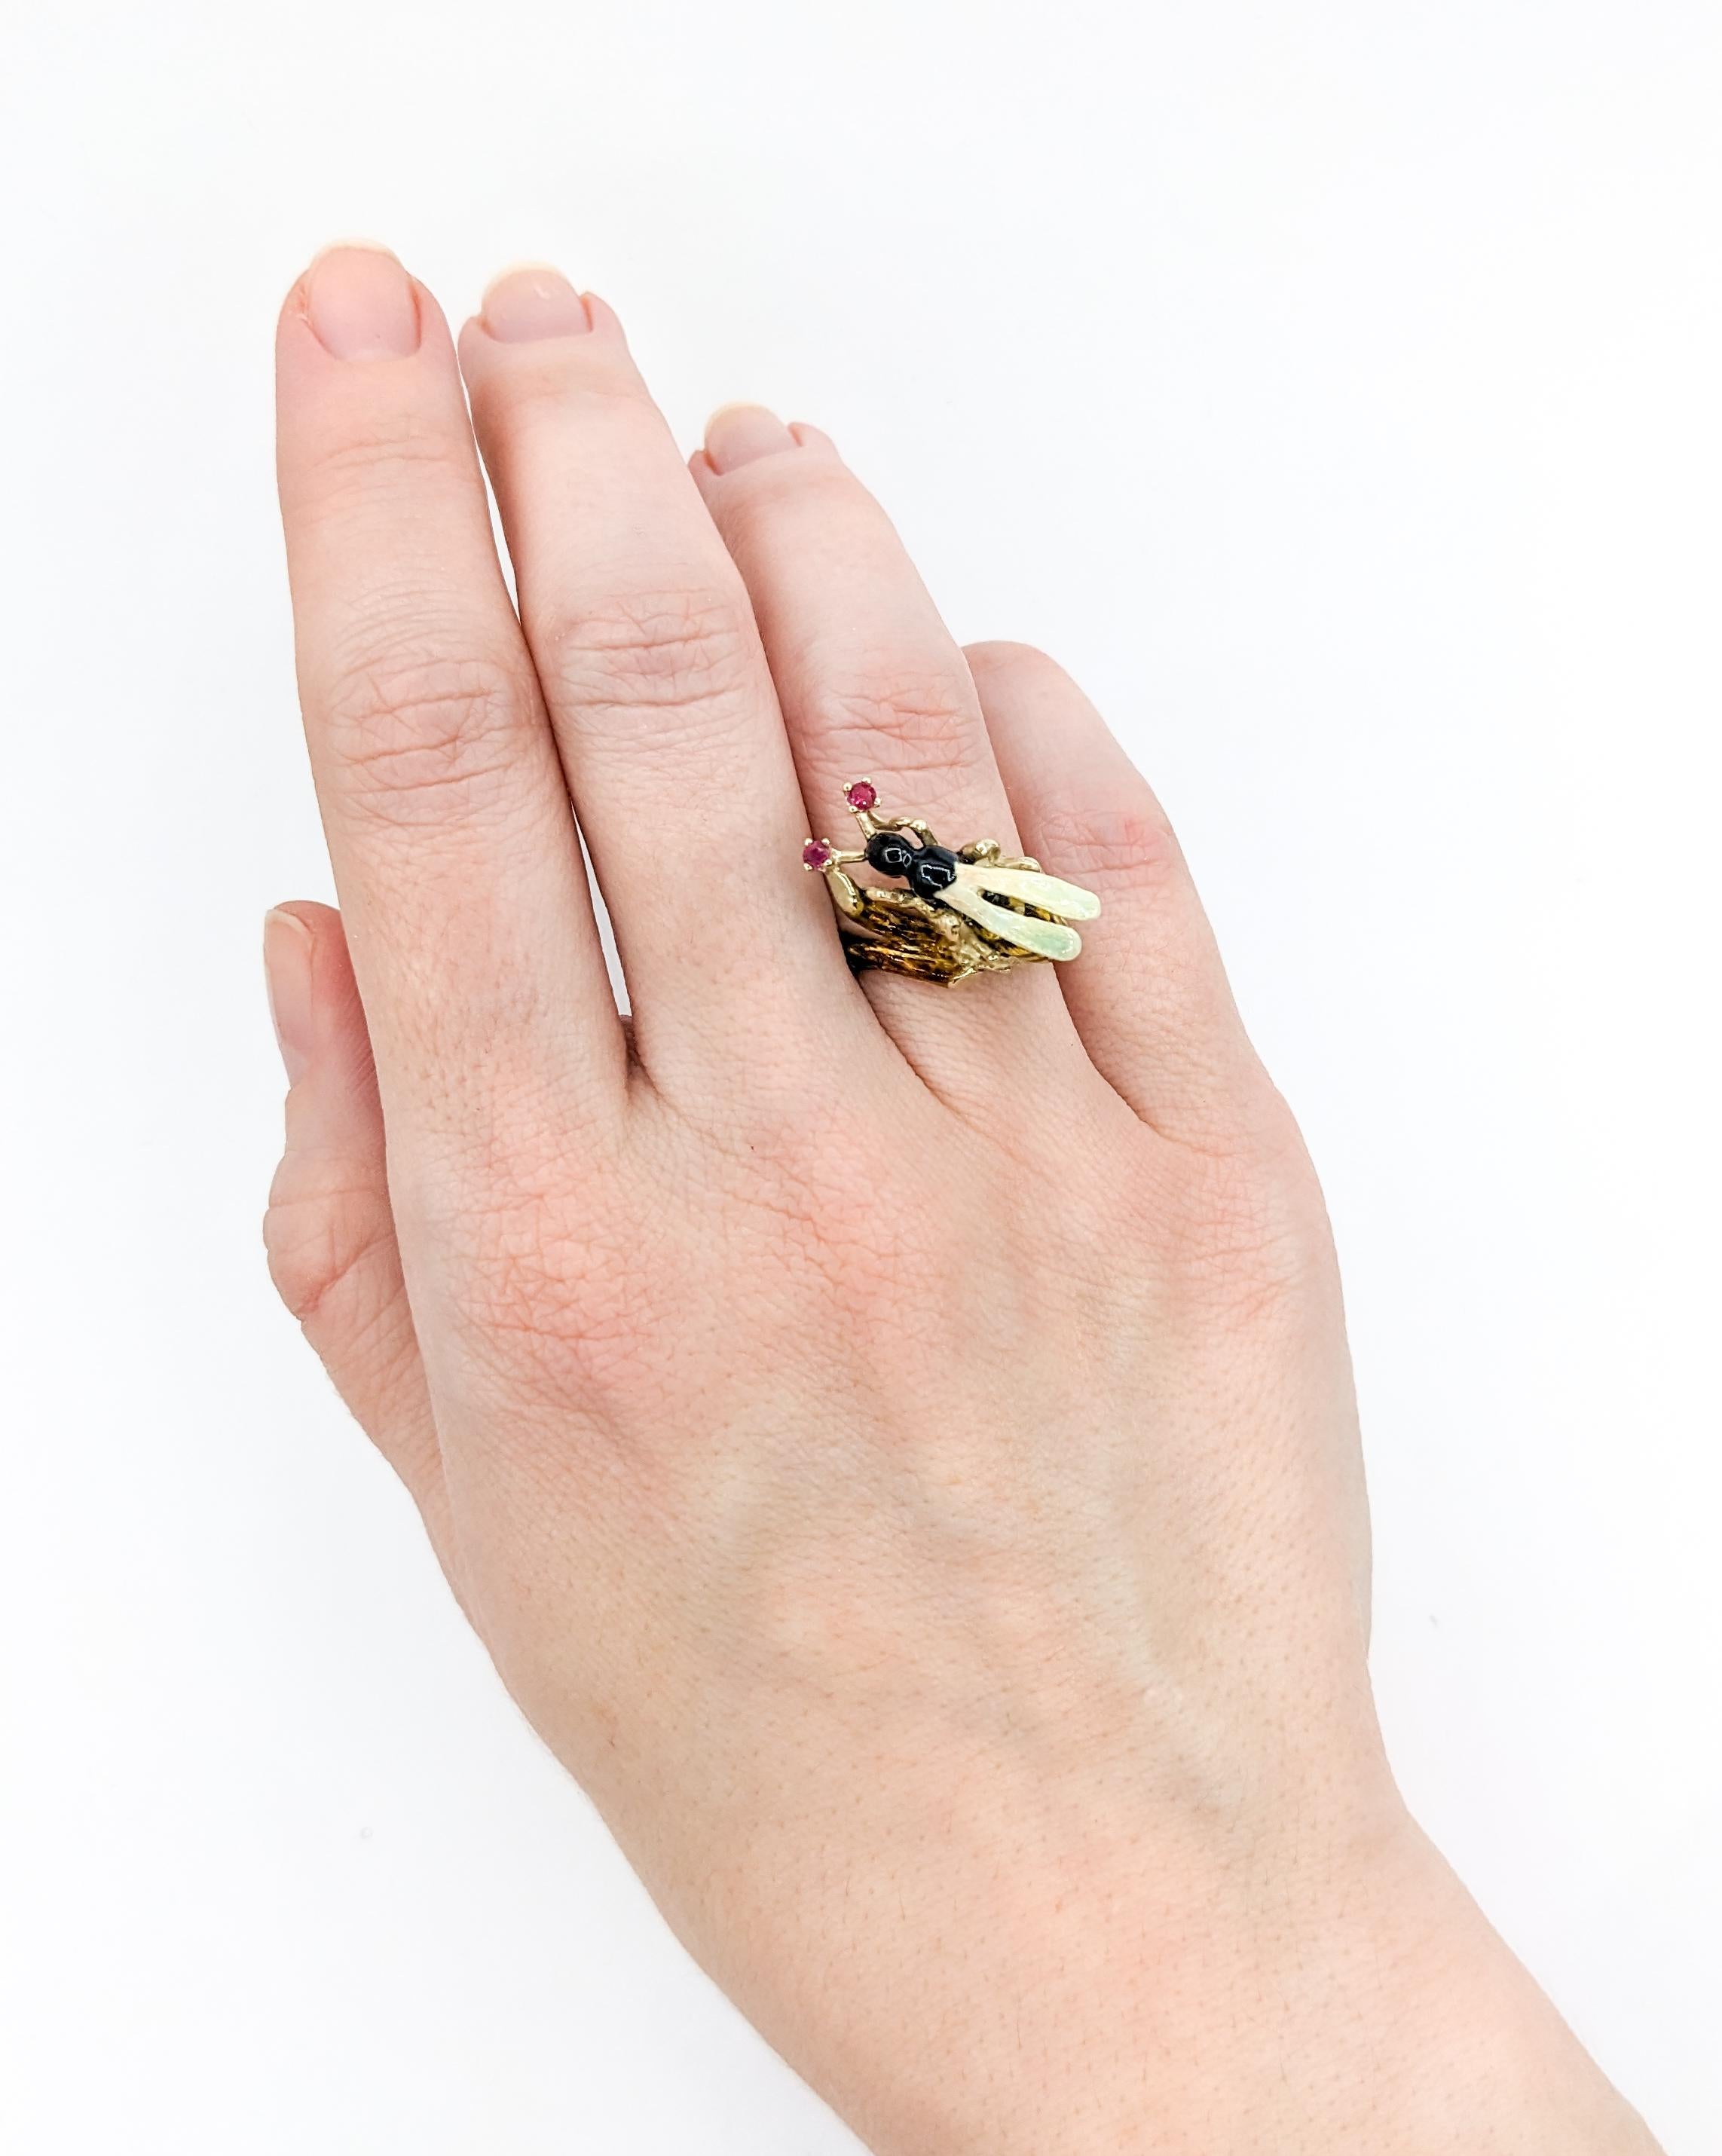 Vintage Figural Enamel Wasp Insect Ring with Rubies In Yellow Gold For Sale 5